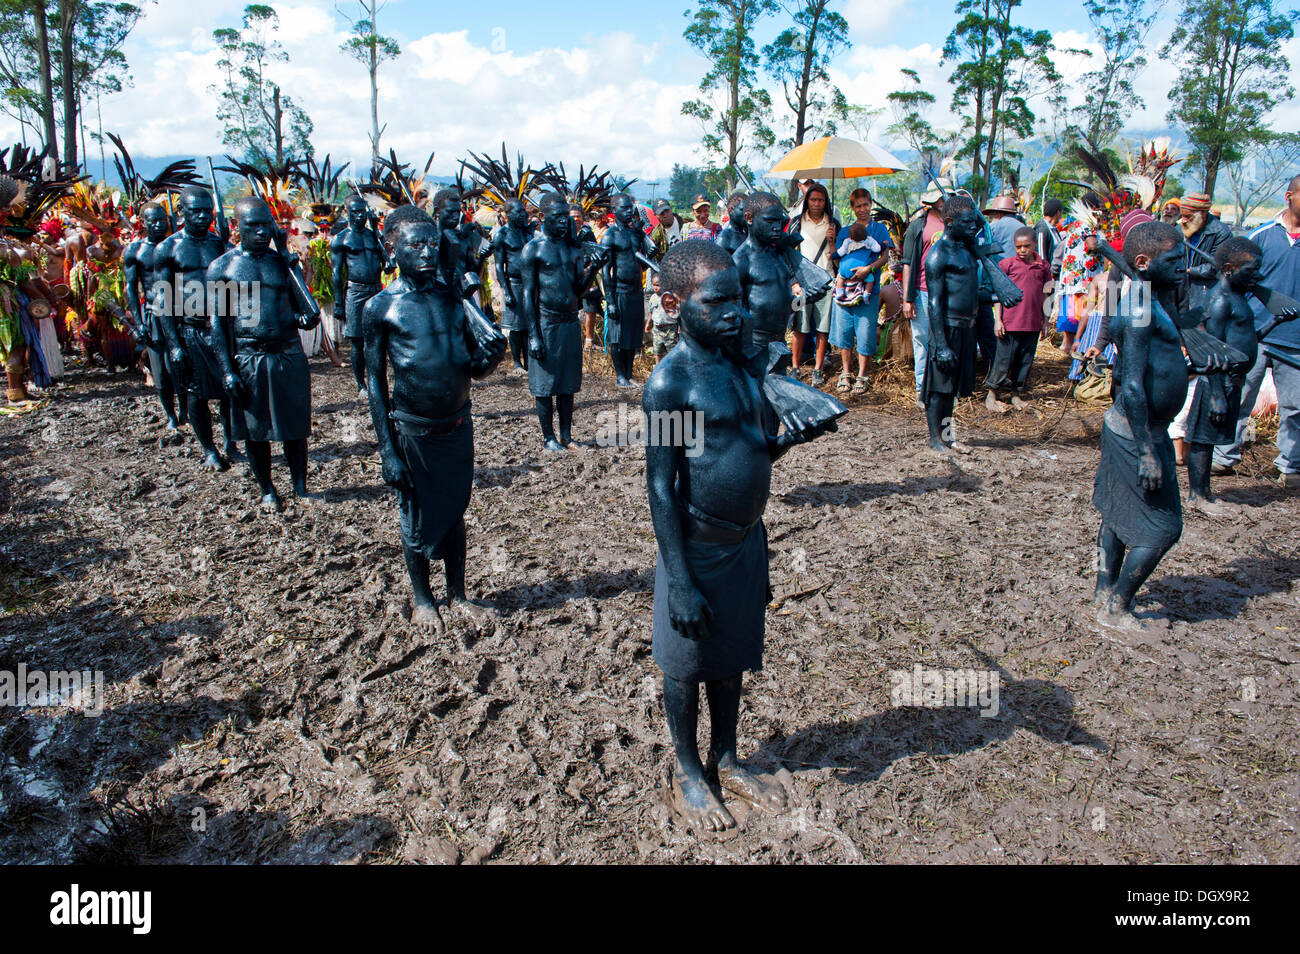 Members of a tribe covered in black paint at the traditional sing-sing gathering, Hochland, Mount Hagen Stock Photo